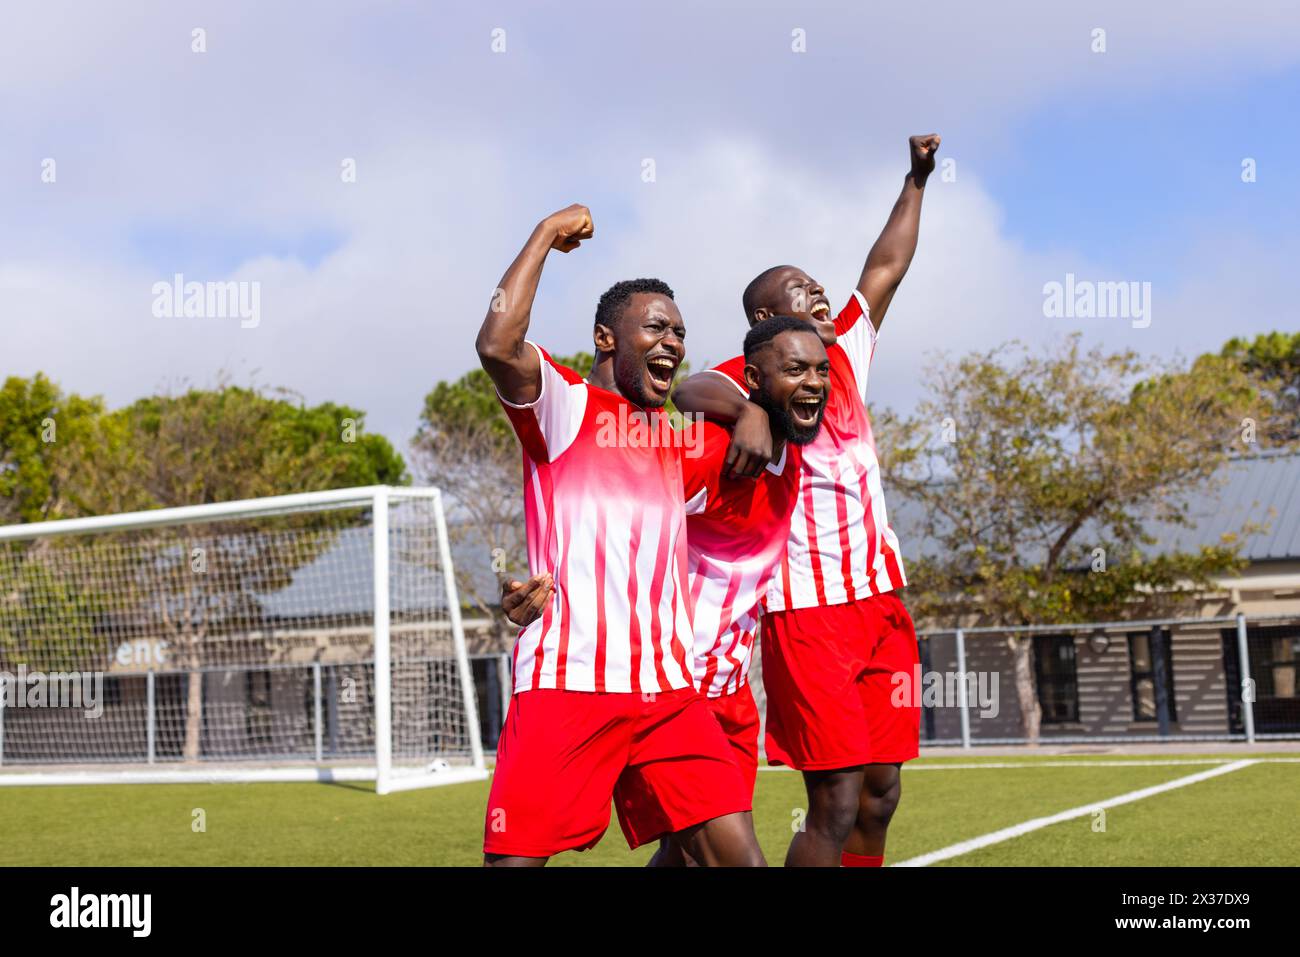 Three African American young male athletes celebrate on soccer field Stock Photo